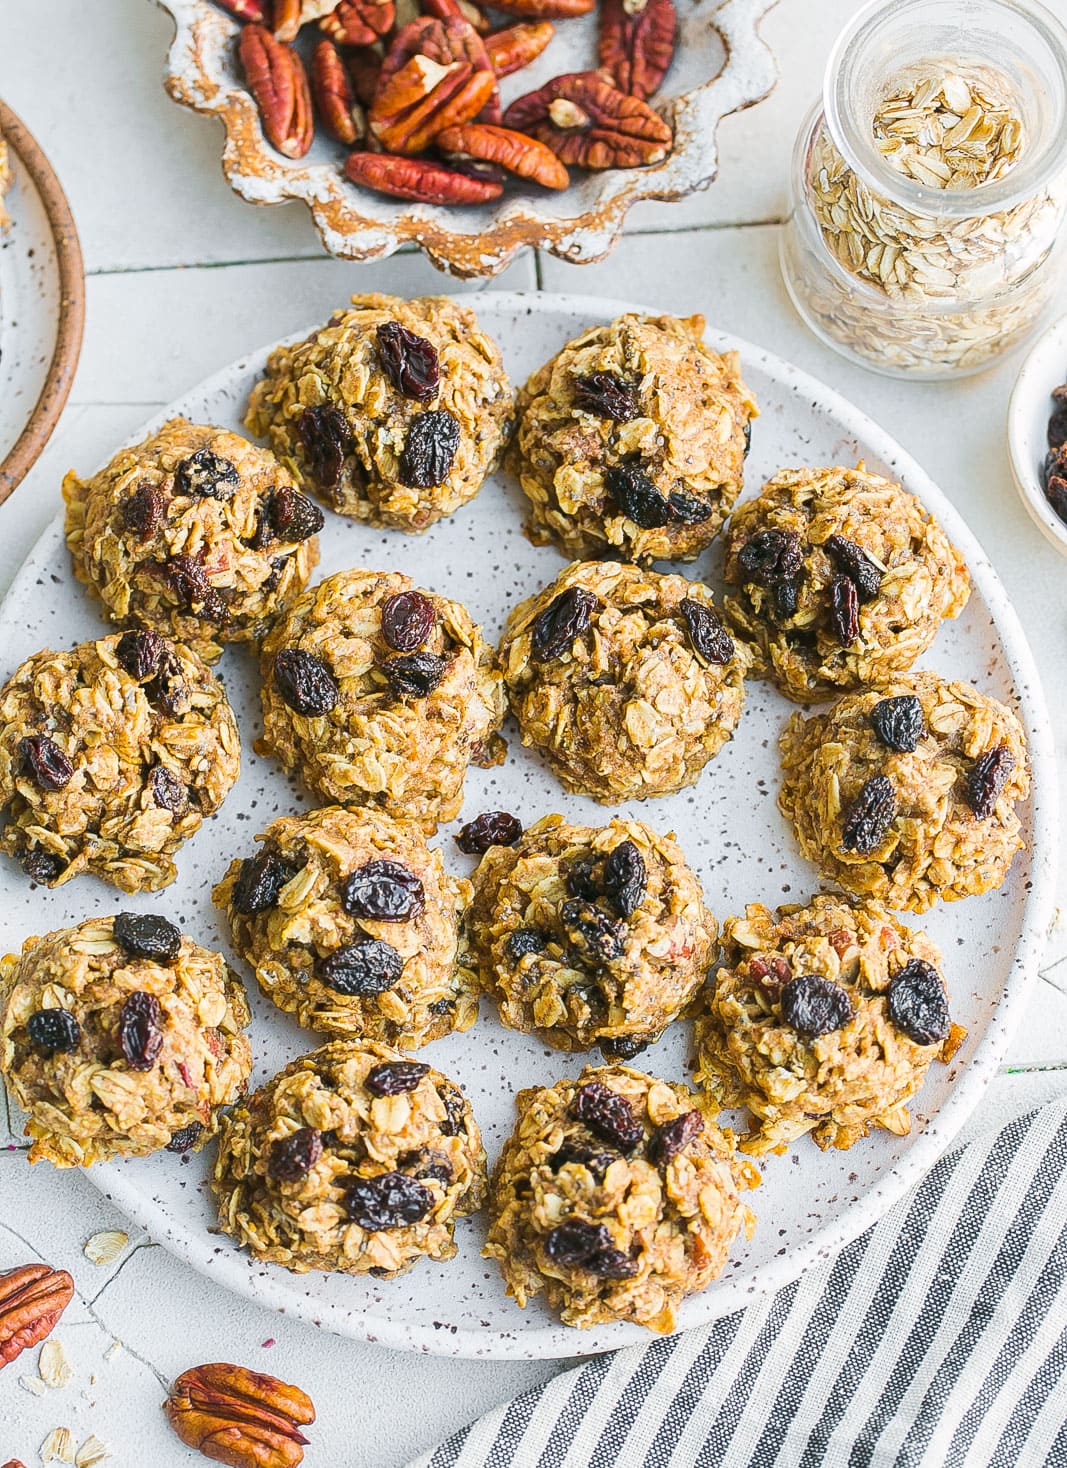 Oatmeal cookies on a plate with pecans and raisins.